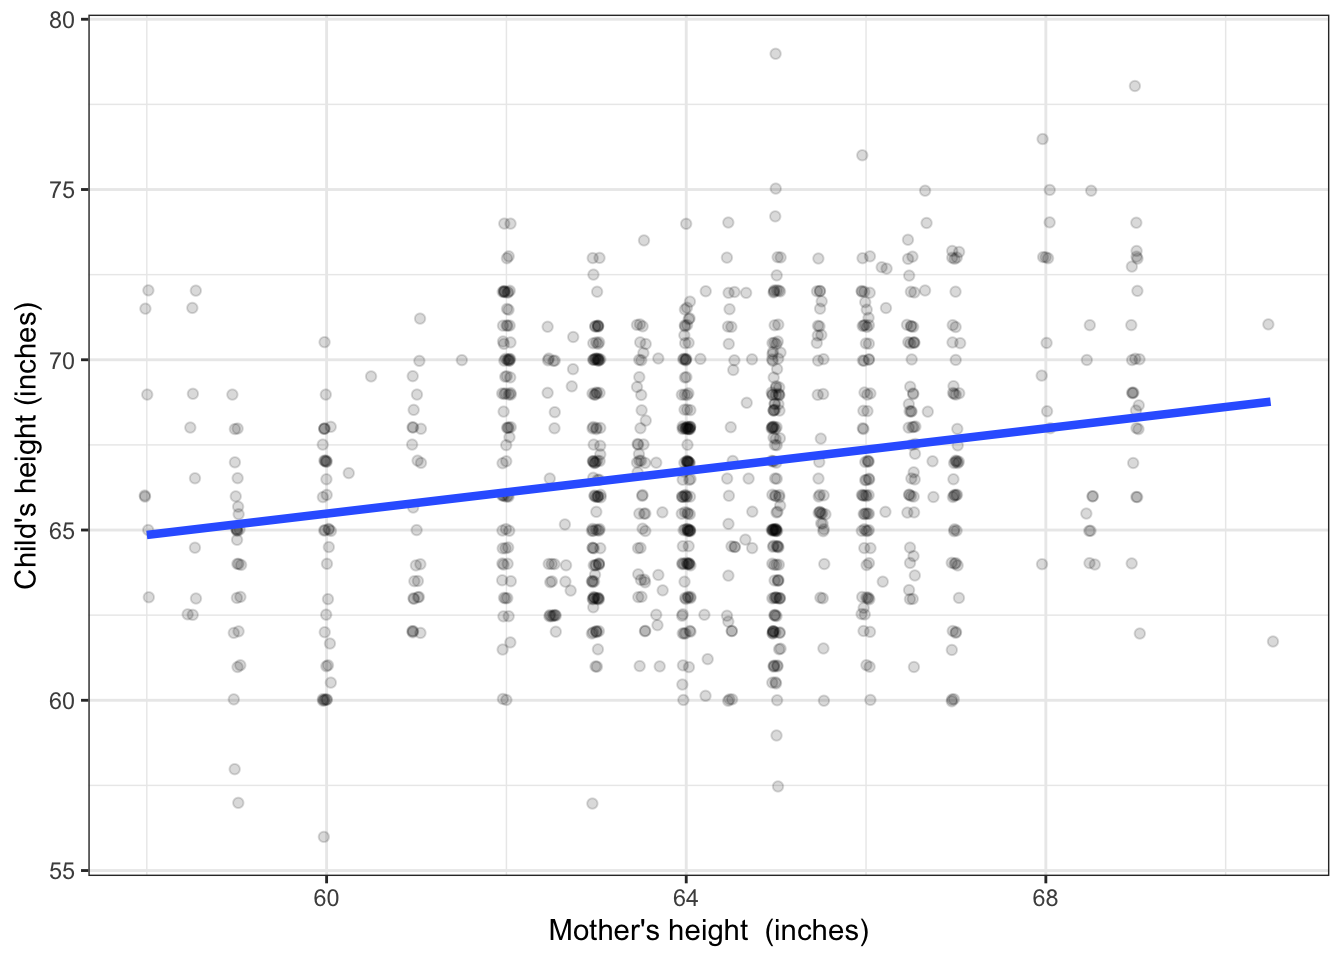 Figure 4.2:  Child's height versus the mother's height. A conventional form of model is a straight line.